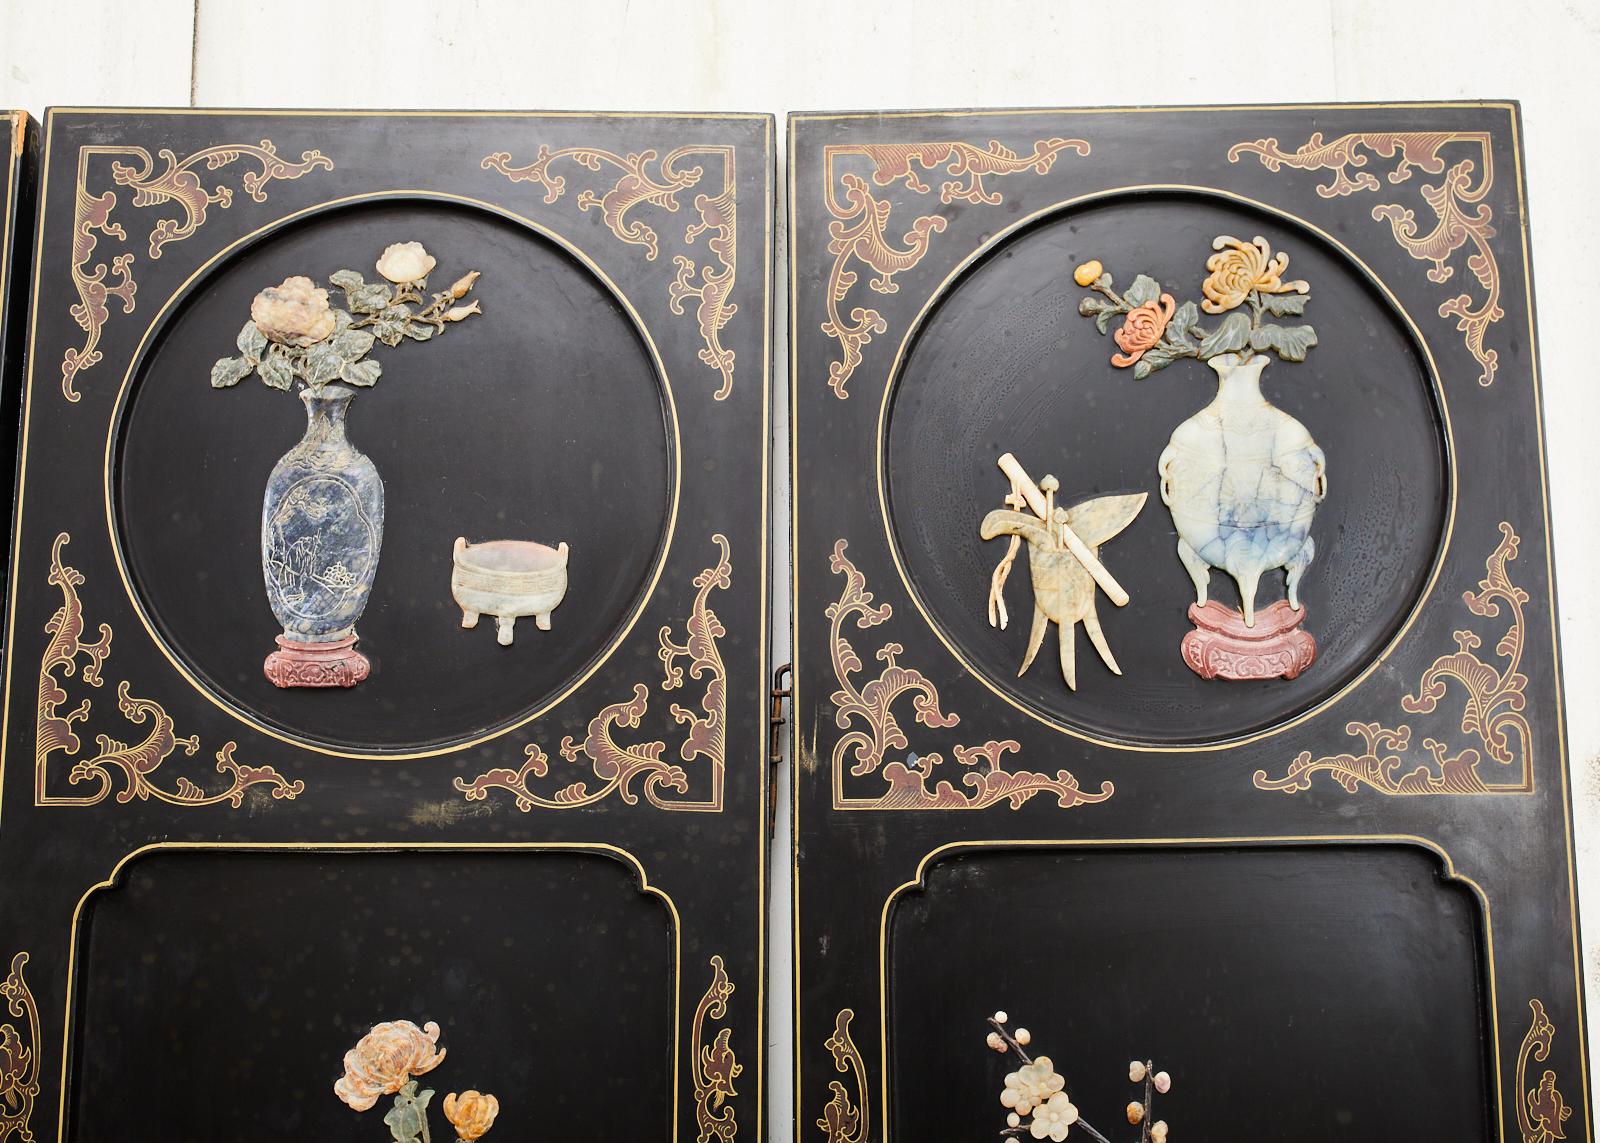 Hand-Crafted Chinese Export Six Panel Lacquered Hardstone Coromandel Screen